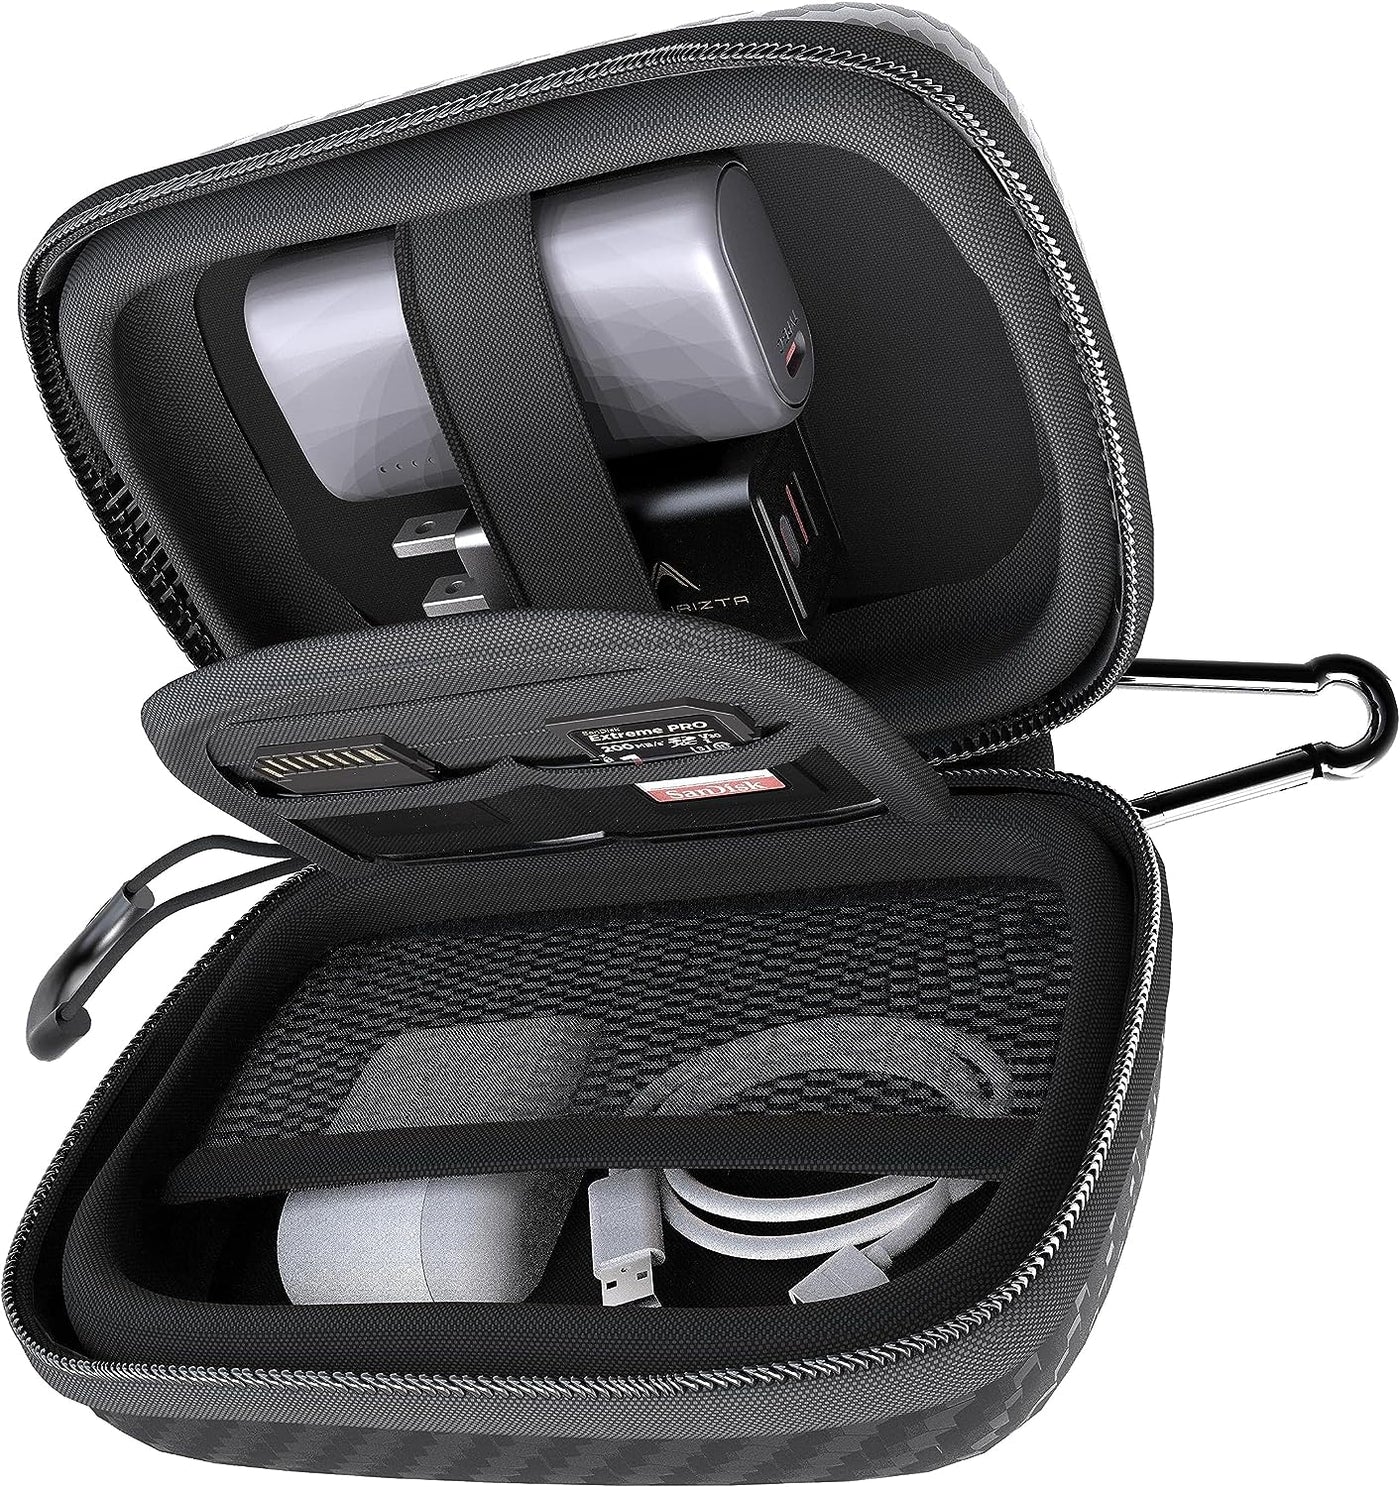 Hard Shell EVA Carrying Case Impact & Water Resistant with Carabiner